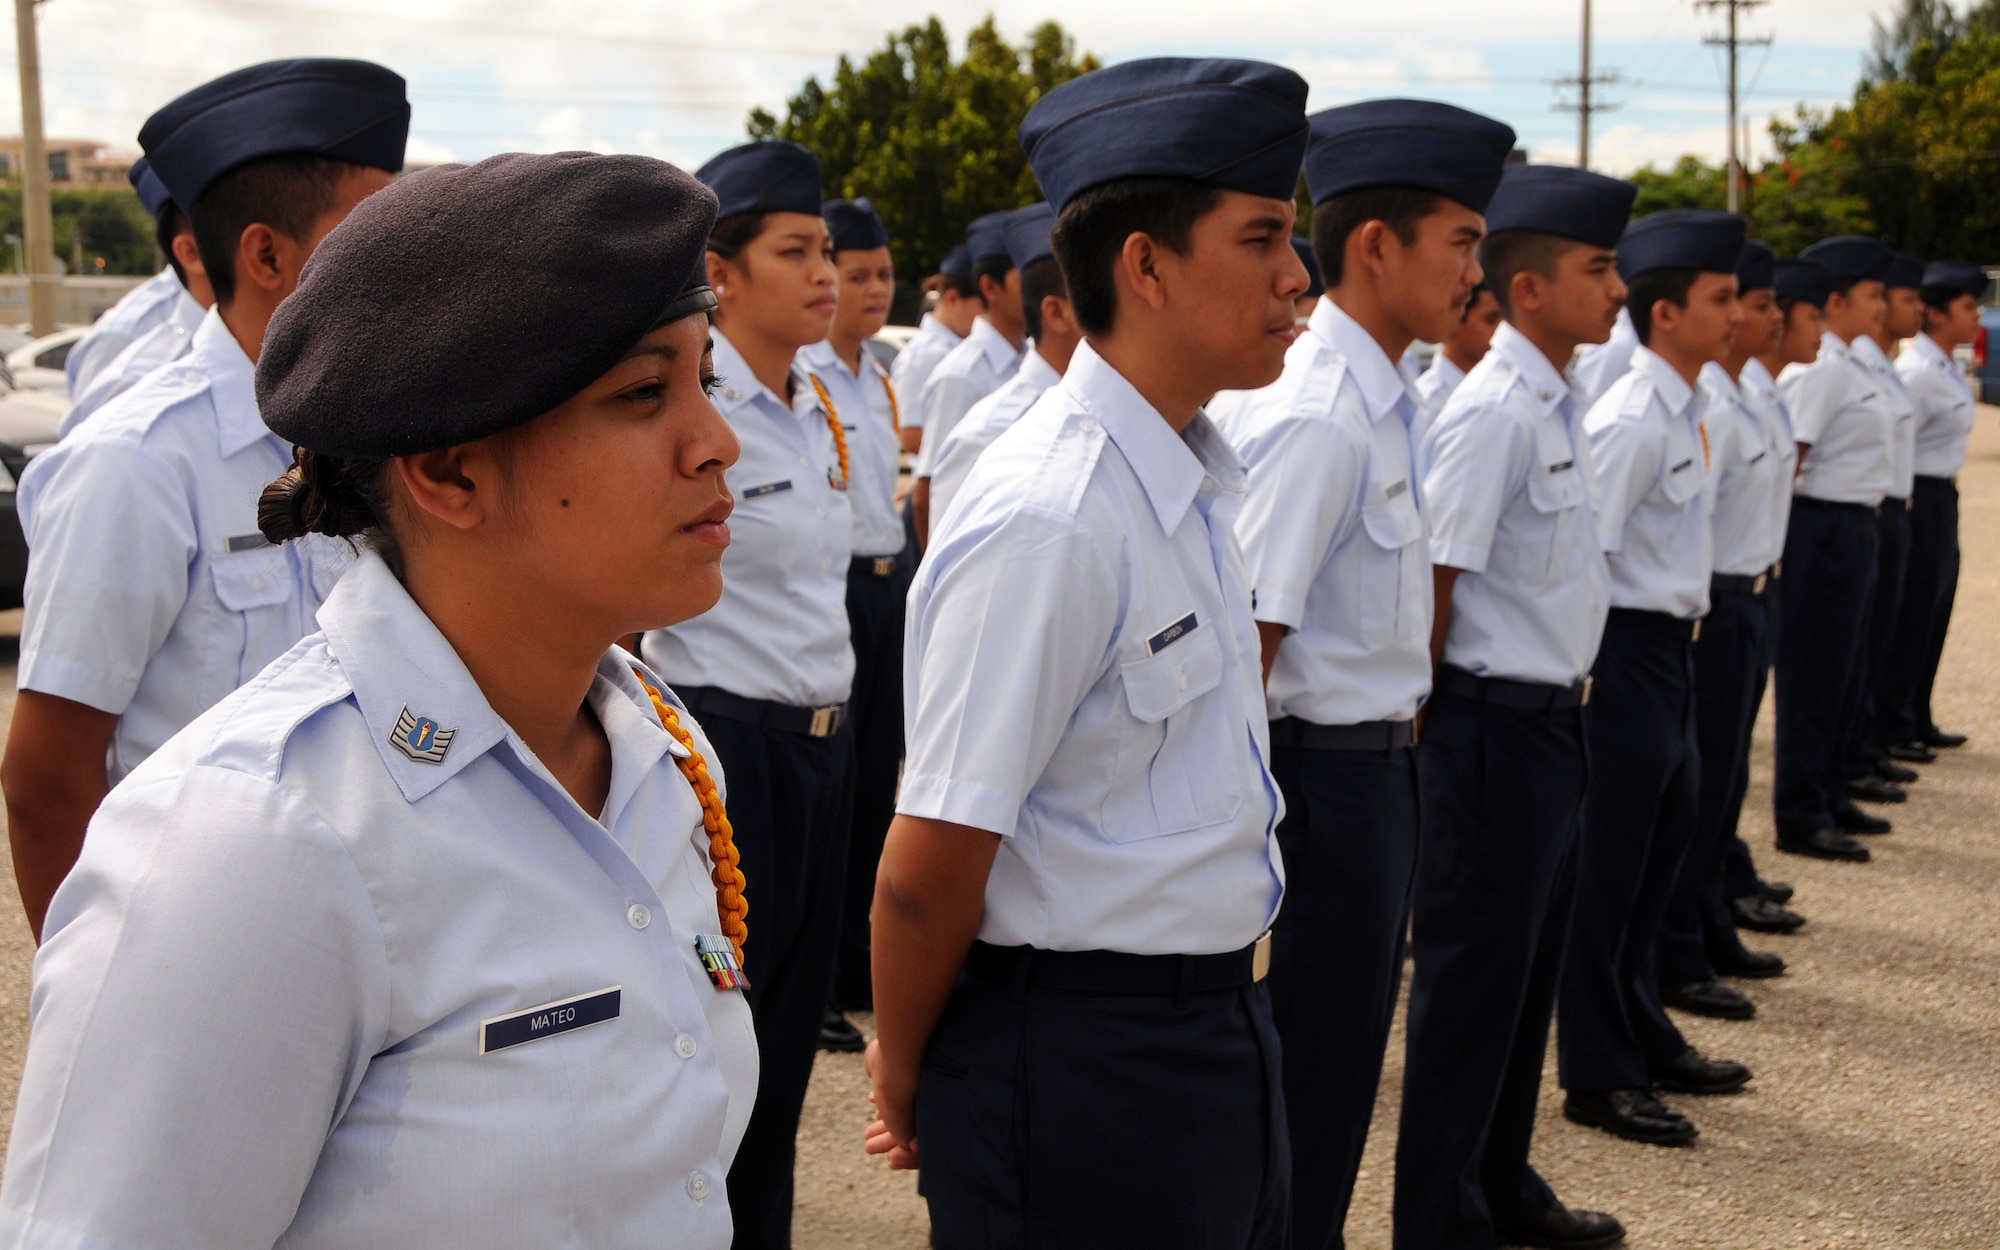 ANDERSEN AIR FORCE BASE, Guam - Cadet Staff Sgt. Pauline Mateo and approximately 50 other cadets of the John F. Kennedy High School Junior Reserve Officer Training Corps stand at ease to while honoring a beloved teacher and mentor, Col. Walter "Tony" Merritt, during his memorial service at the JFK High School in Tammuning, Guam, Oct. 4. Colonel Merritt served as a JROTC instructor for 28 years at JFK. (U.S. Air Force photo by Airman 1st Class Courtney Witt)